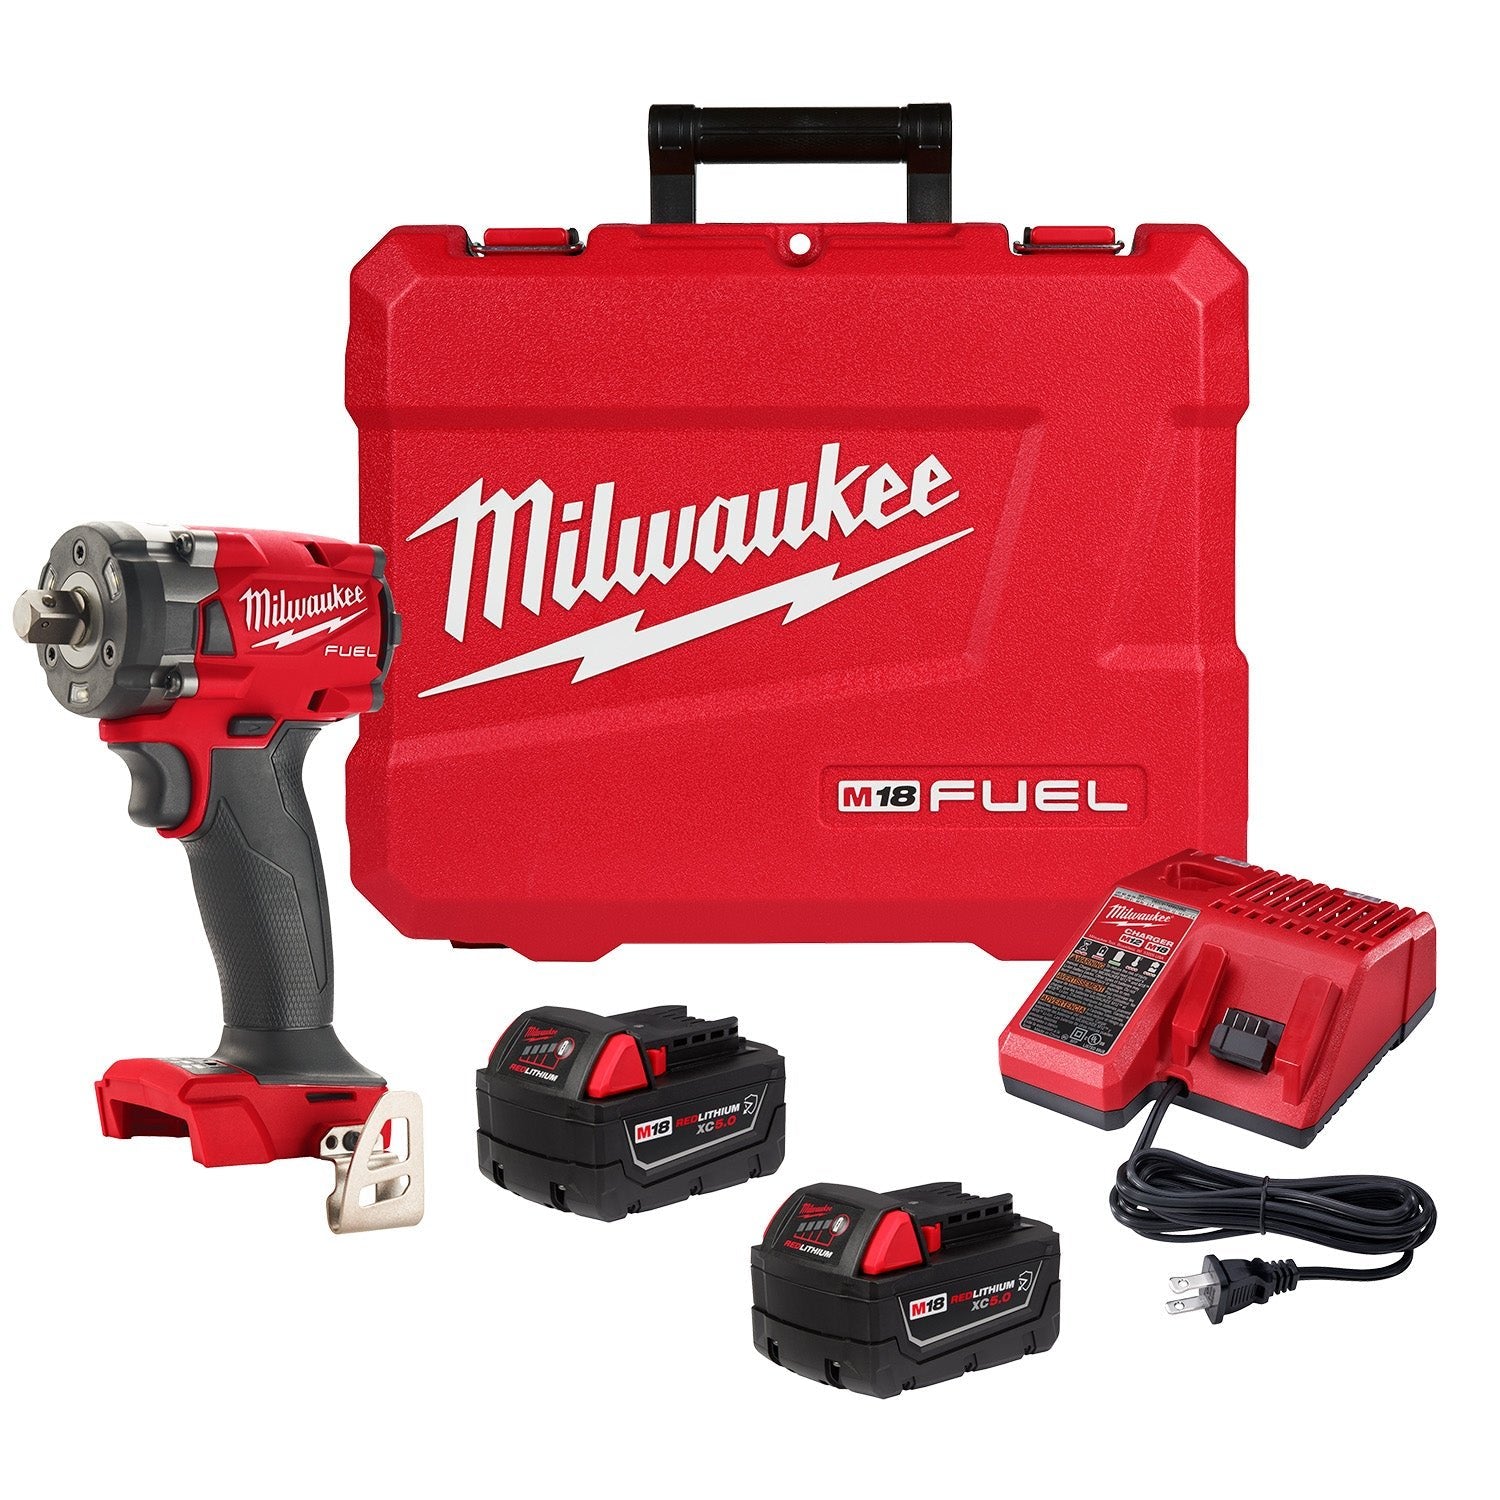 Milwaukee 2855P-22R - M18 FUEL™ 1/2 " Compact Impact Wrench w/ Pin Detent Kit